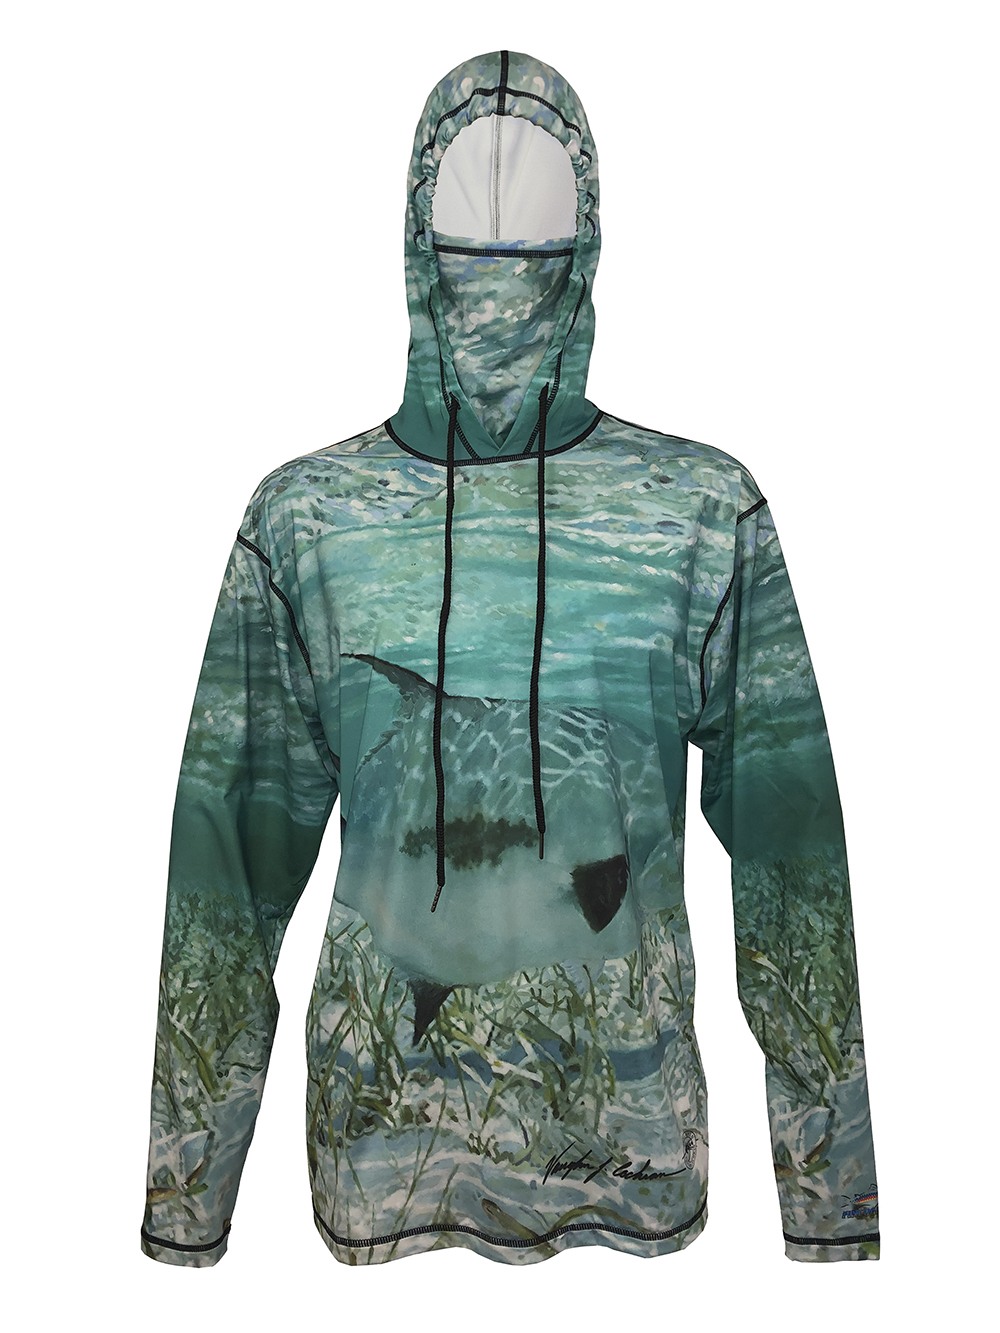 Permit Saltwater Fishing Hoodies - Saltwater on the Fly Outdoor